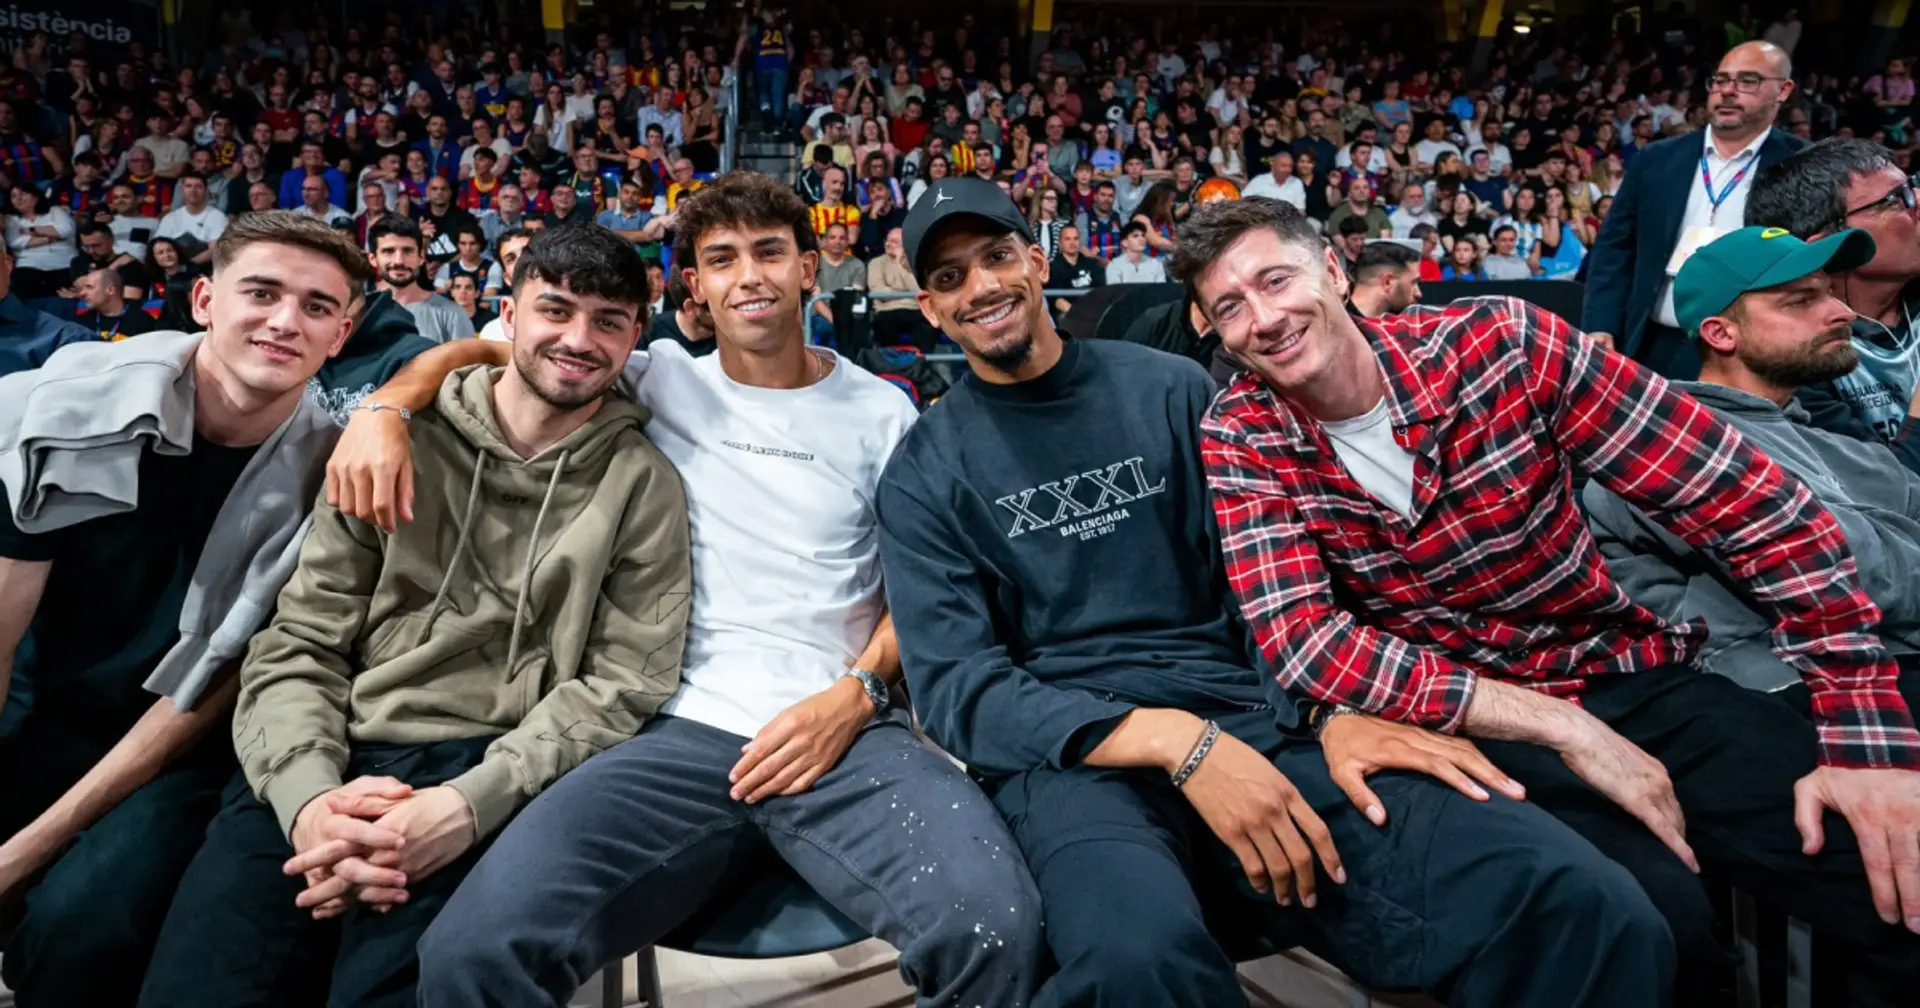 Spotted: 5 Barca senior players watching basketball game – result will motivate them in massive April clash